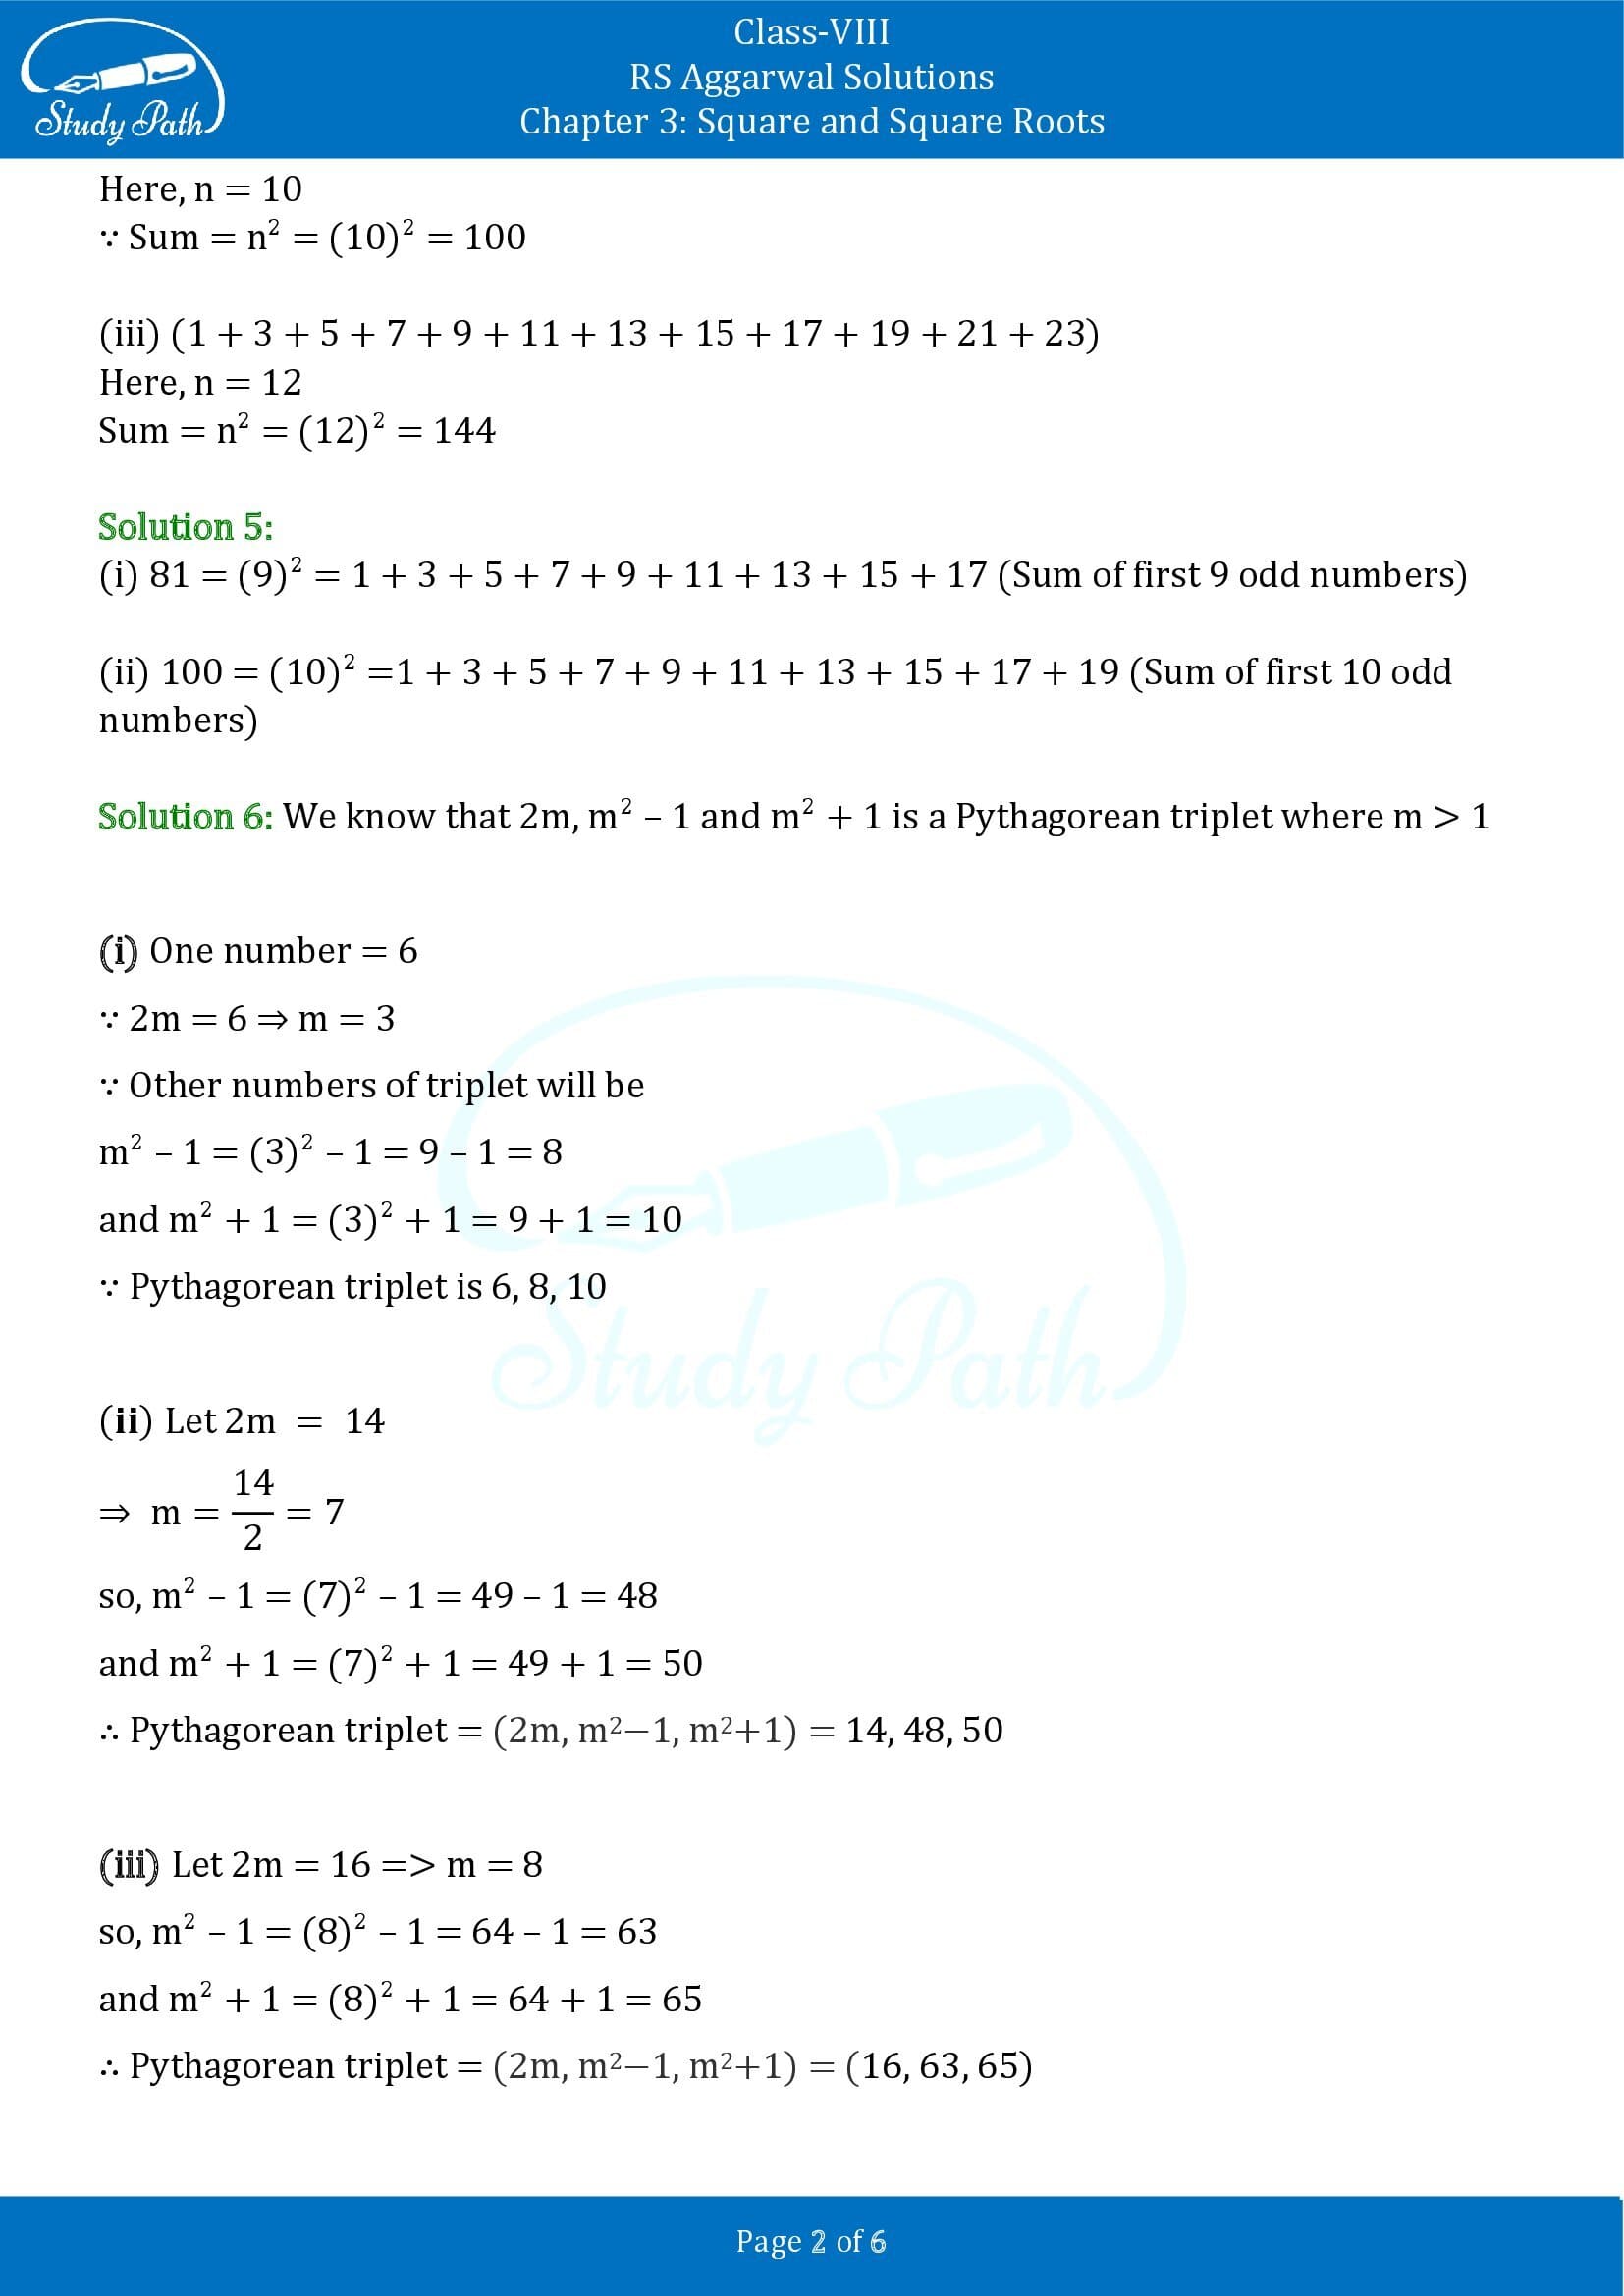 RS Aggarwal Solutions Class 8 Chapter 3 Square and Square Roots Exercise 3B 00002